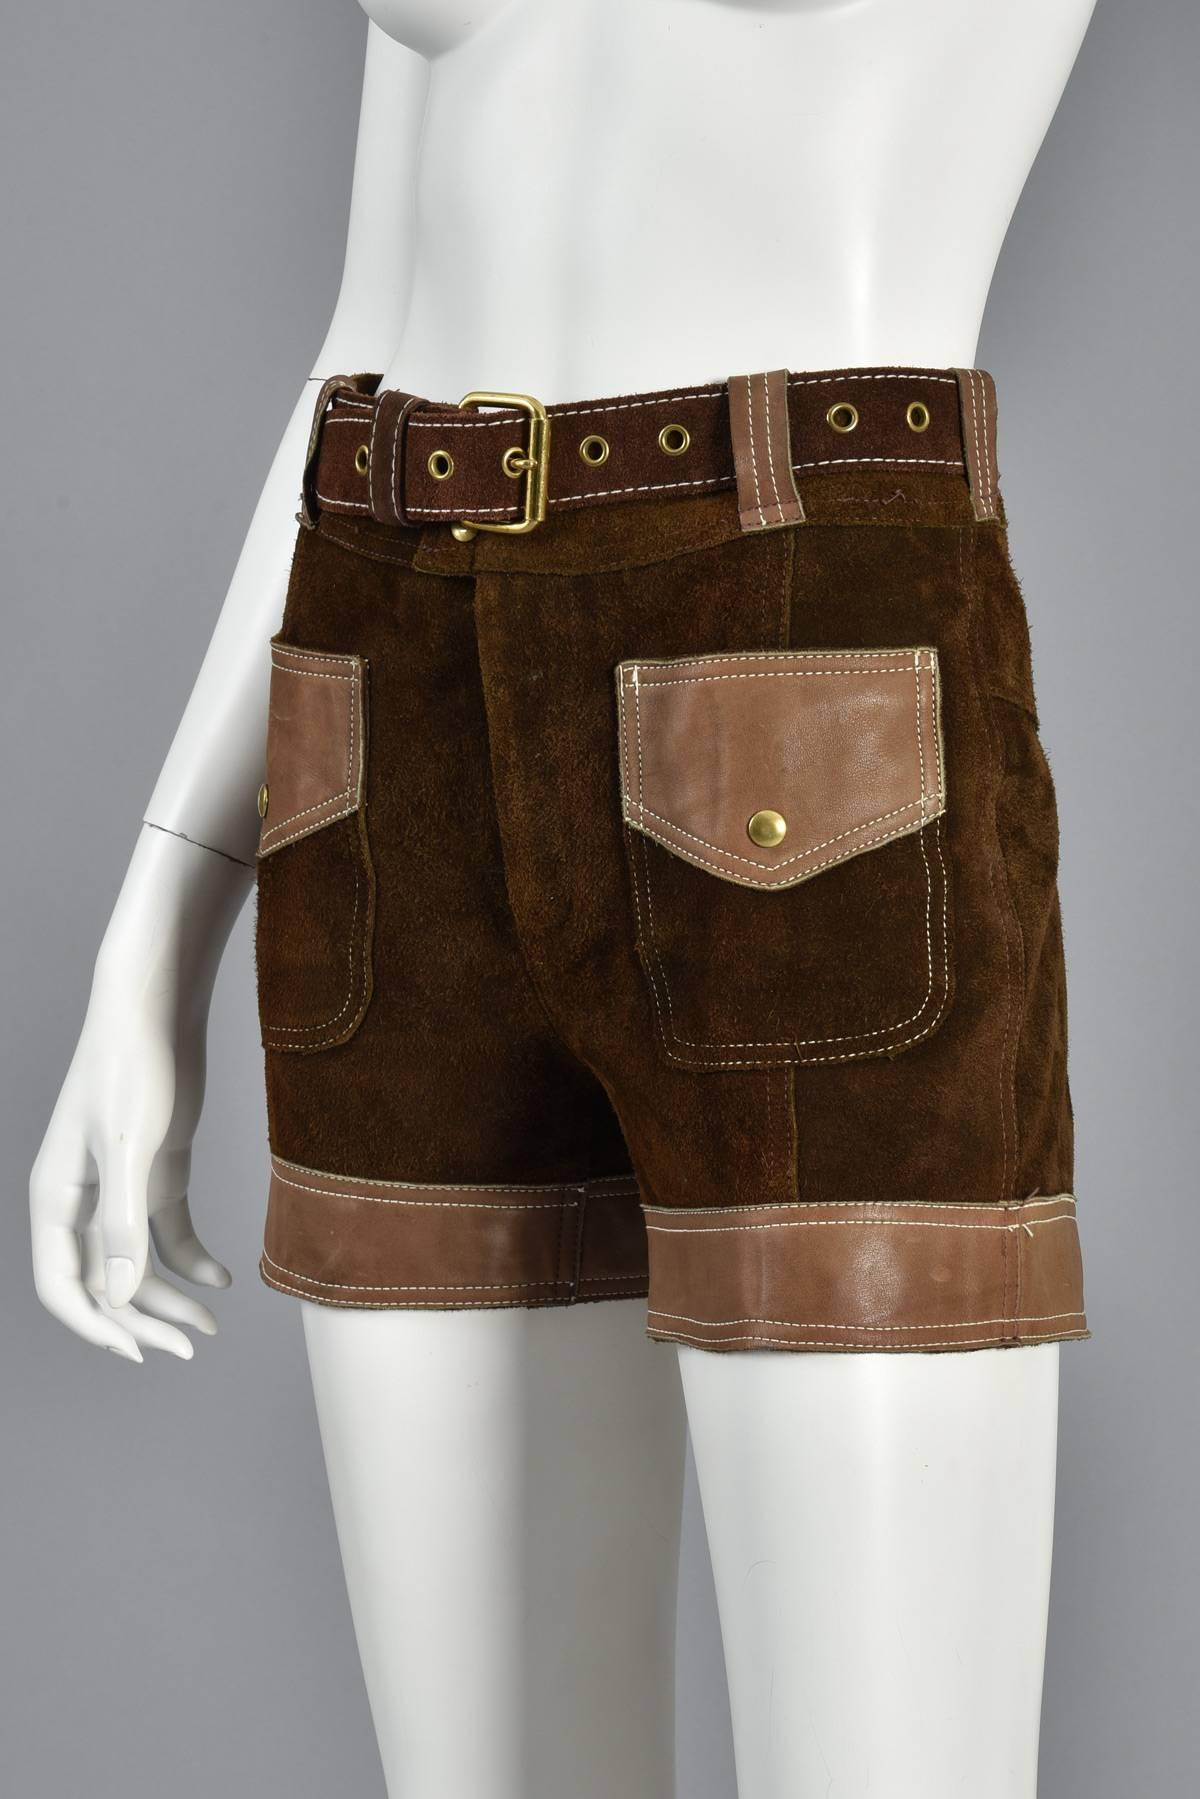 Women's Almost Famous 60s Leather and Suede High Waisted Shorts